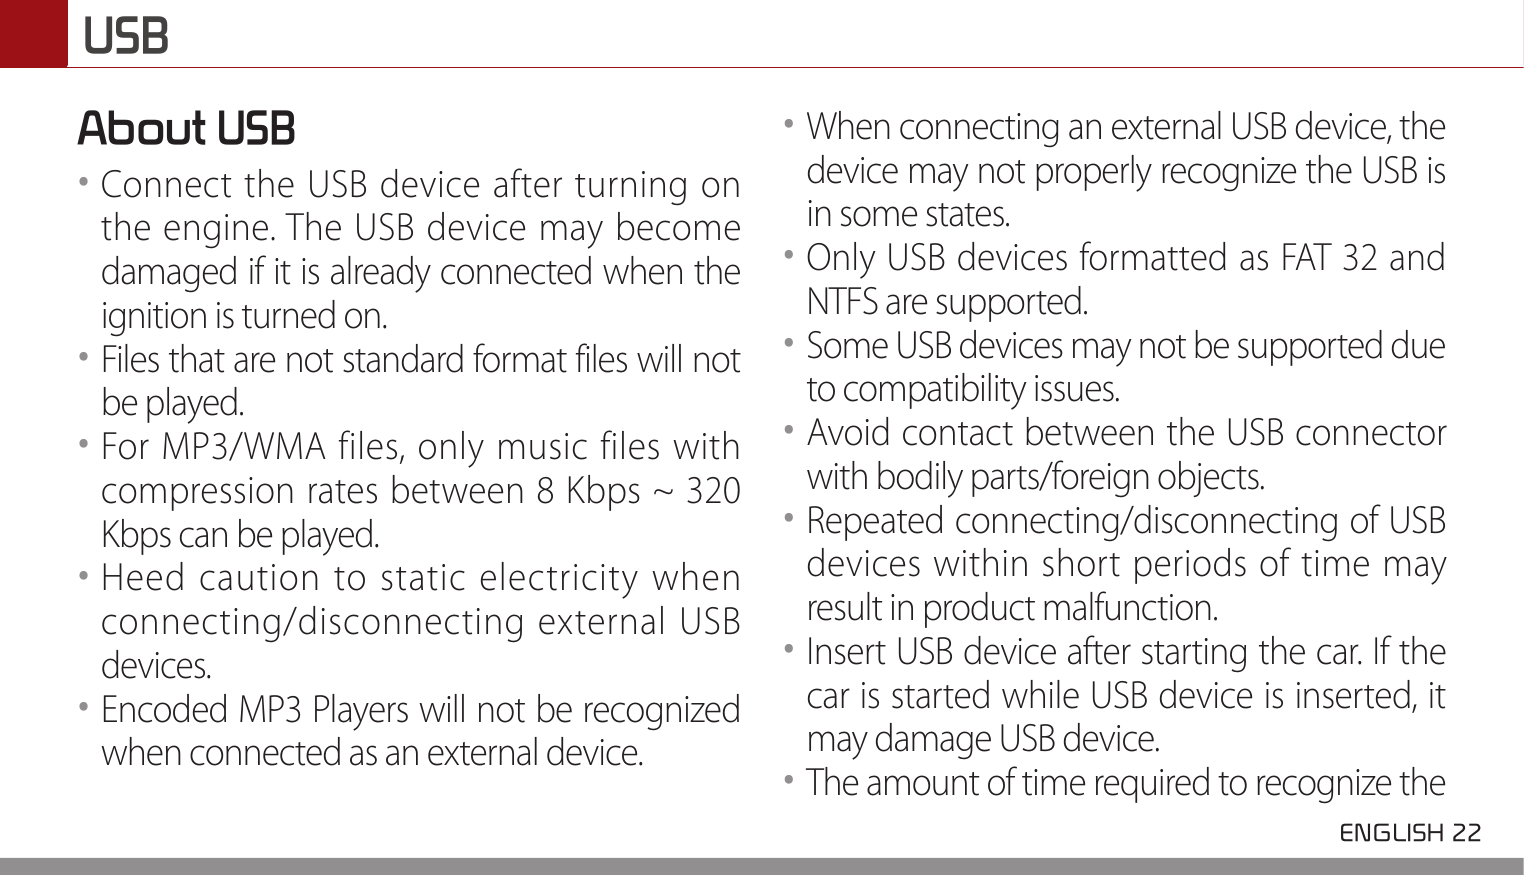 USB ENGLISH 22 About USB••Connect the USB device after turning on the engine. The USB device may become damaged if it is already connected when the ignition is turned on. ••Files that are not standard format files will not be played. ••For MP3/WMA files, only music files with compression rates between 8 Kbps ~ 320 Kbps can be played. ••Heed caution to static electricity when connecting/disconnecting external USB devices. ••Encoded MP3 Players will not be recognized when connected as an external device. ••When connecting an external USB device, the device may not properly recognize the USB is in some states. ••Only USB devices formatted as FAT 32 and NTFS are supported.••Some USB devices may not be supported due to compatibility issues. ••Avoid contact between the USB connector with bodily parts/foreign objects.••Repeated connecting/disconnecting of USB devices within short periods of time may result in product malfunction. ••Insert USB device after starting the car. If the car is started while USB device is inserted, it may damage USB device. ••The amount of time required to recognize the 